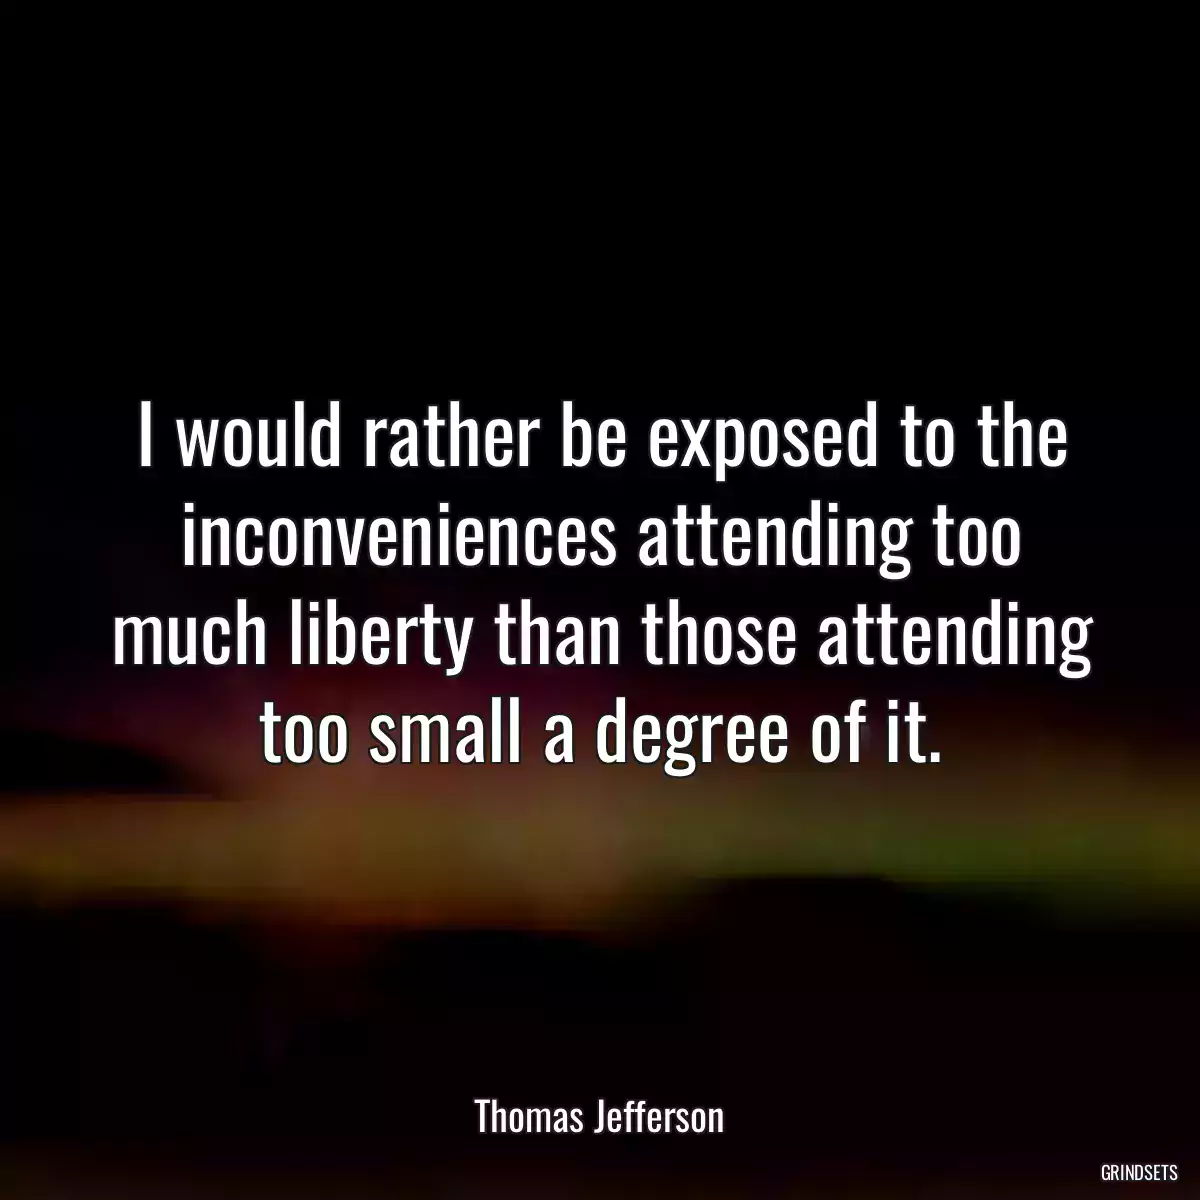 I would rather be exposed to the inconveniences attending too much liberty than those attending too small a degree of it.